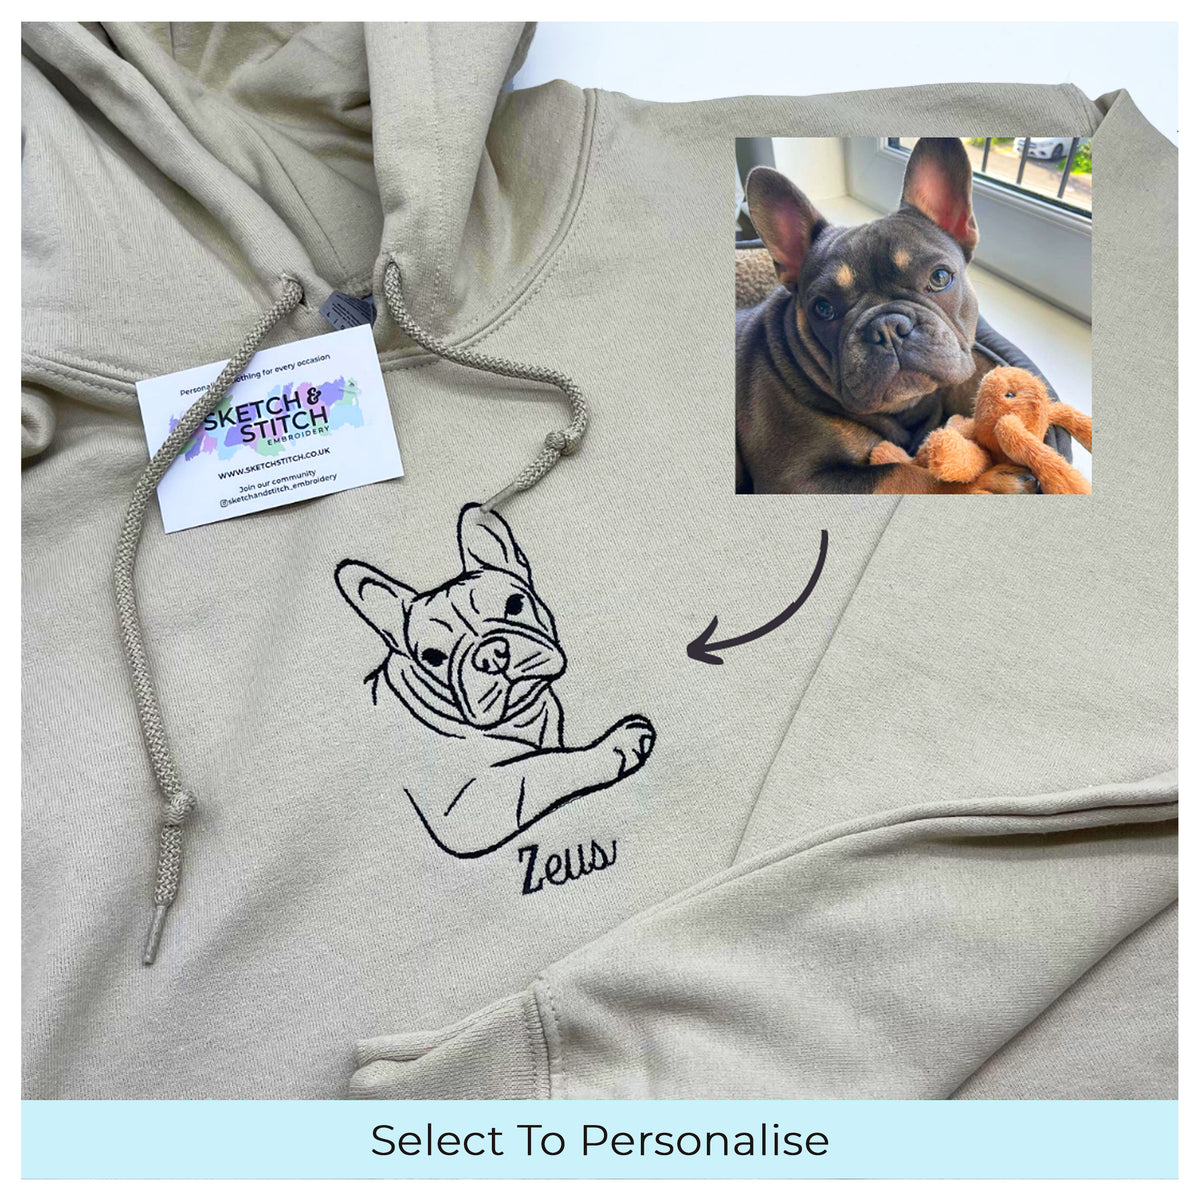 Customised Embroidered Outline Stitch Adult Hoodie – Sofia Marino Ltd T/A  Sketch & Stitch